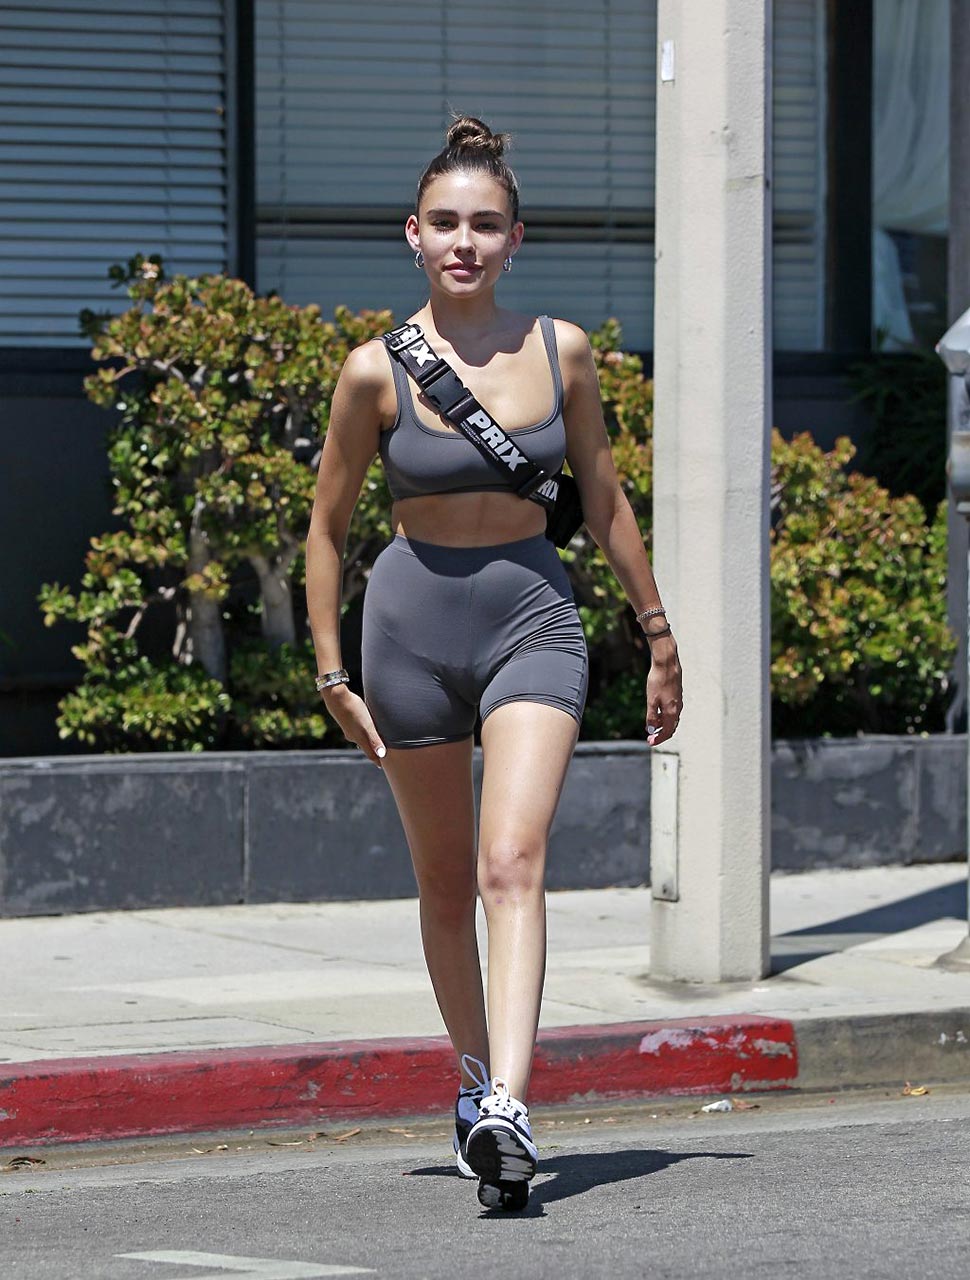 Juicy Madison Beer Cameltoe In Tight Gray Shorts Scandal Planet